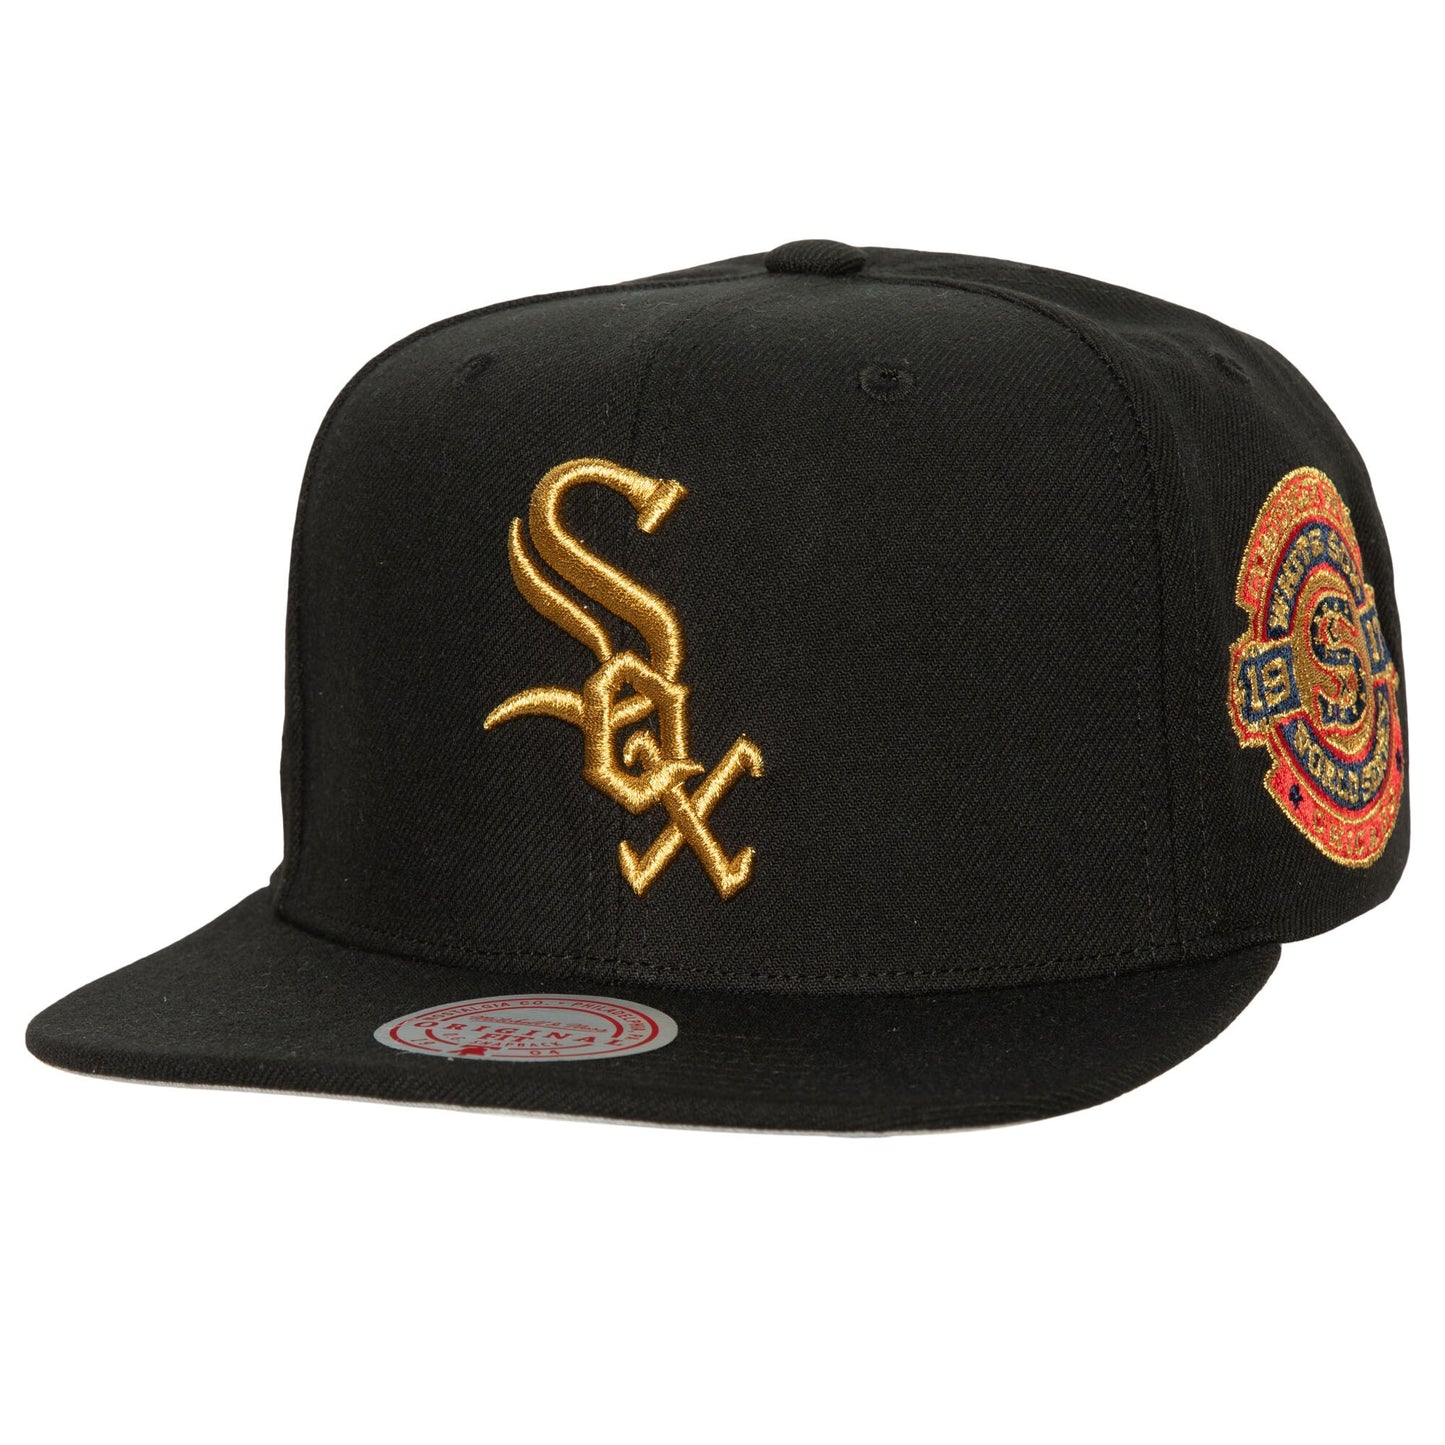 Chicago White Sox Mitchell & Ness Champ'd Up Snapback Hat - Black